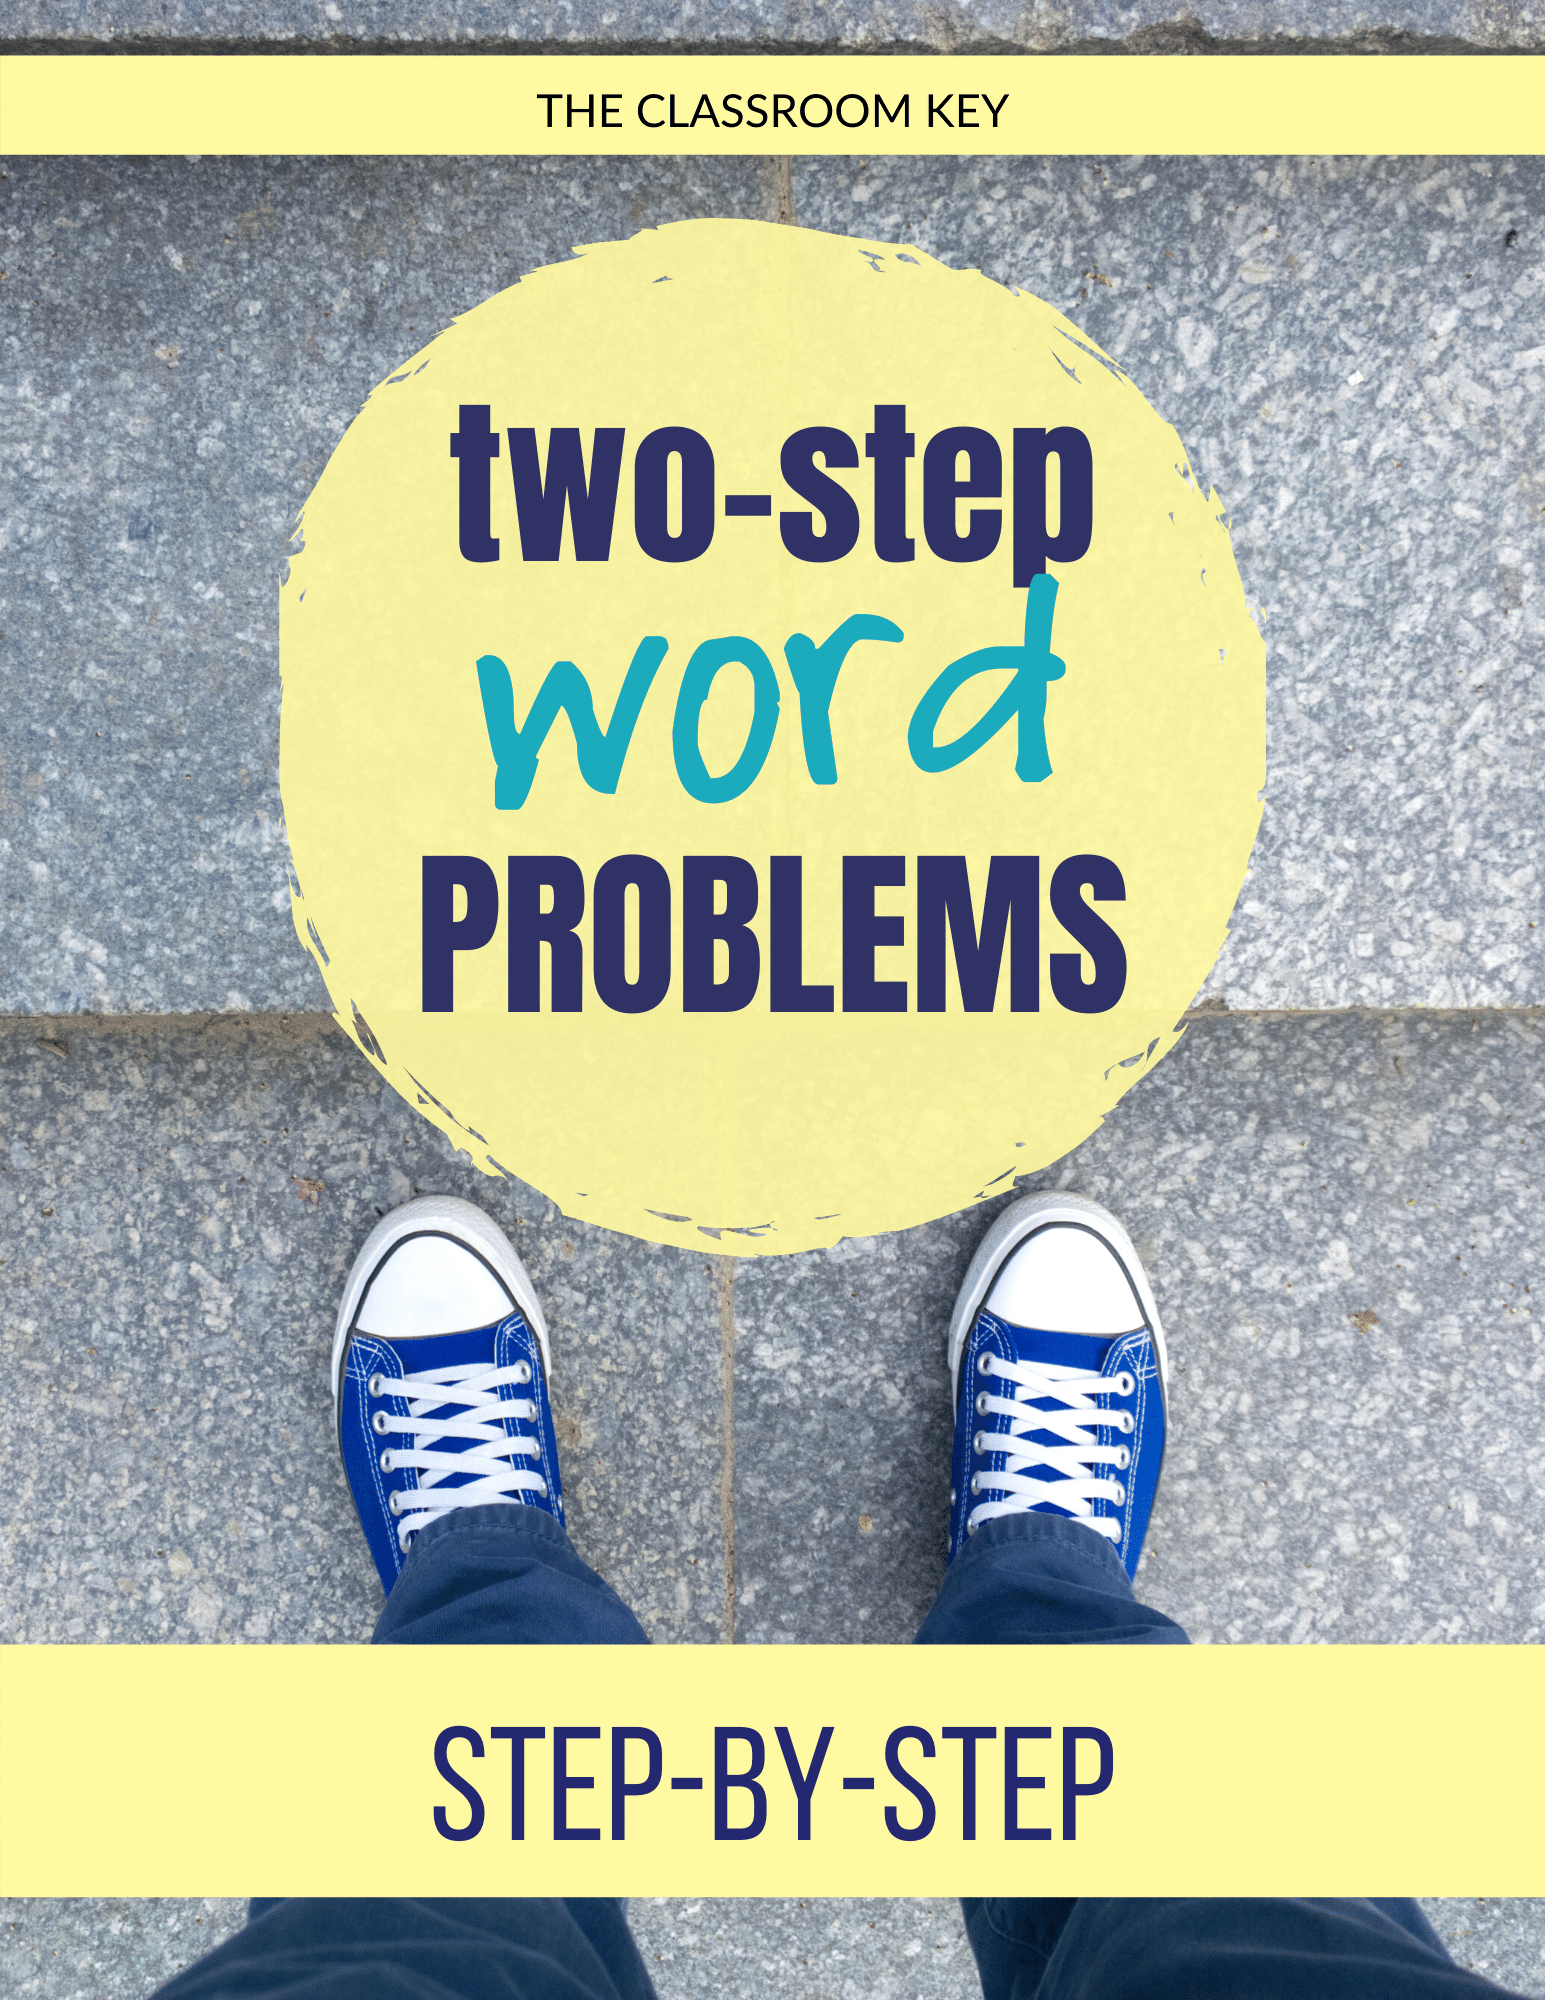 Teach 2nd graders how to accurately solve two step word problems by breaking the problem apart, using pictures, creating equations, and using symbols for unknowns. Meets Common Core standard 2.OA.A.1